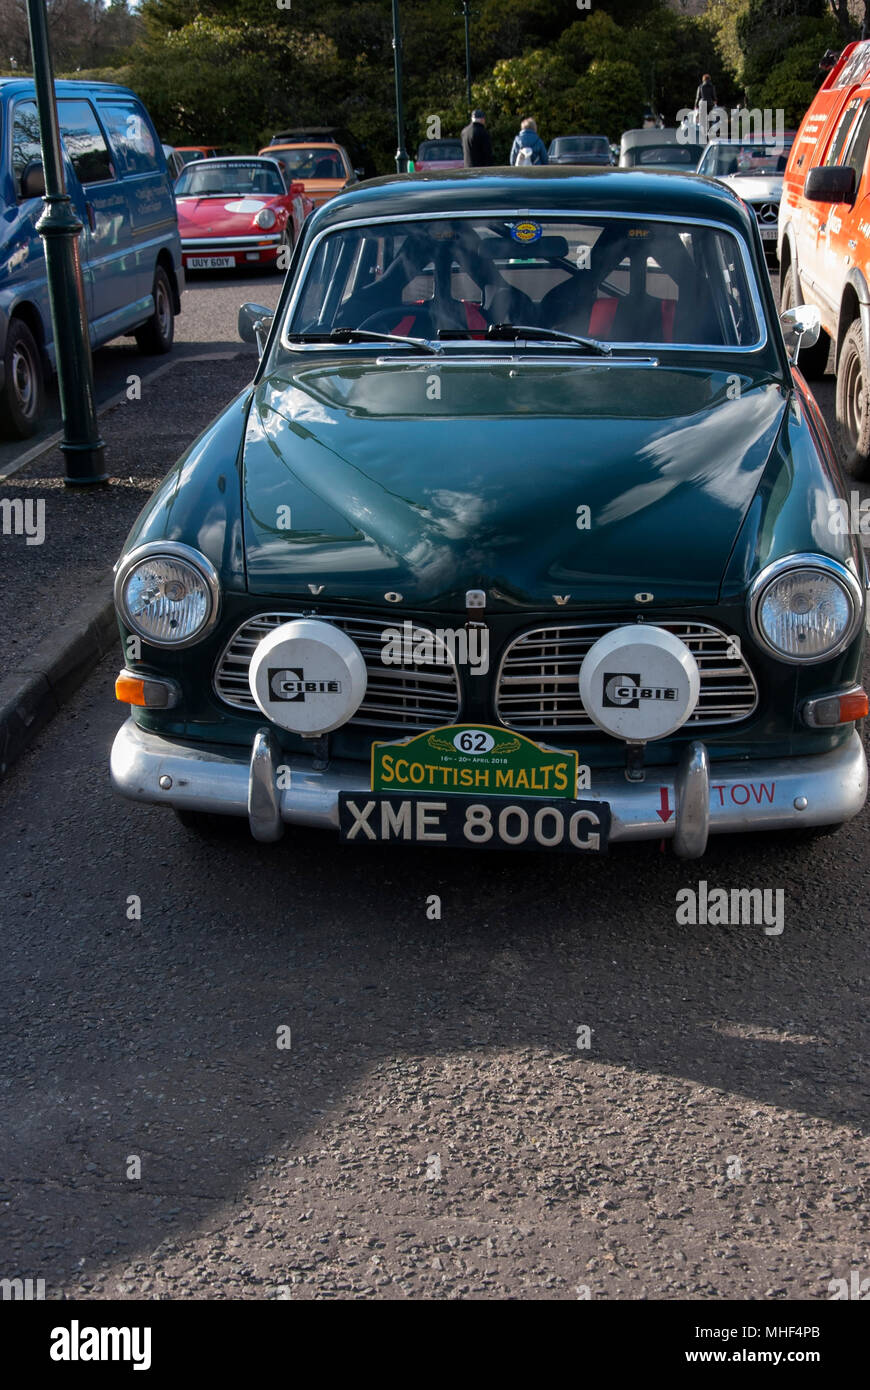 1969 Green Volvo Amazon Rally Car front portrait view of green 1969 right hand drive swedish rally prepared saloon car automobile vehicle parked stati Stock Photo